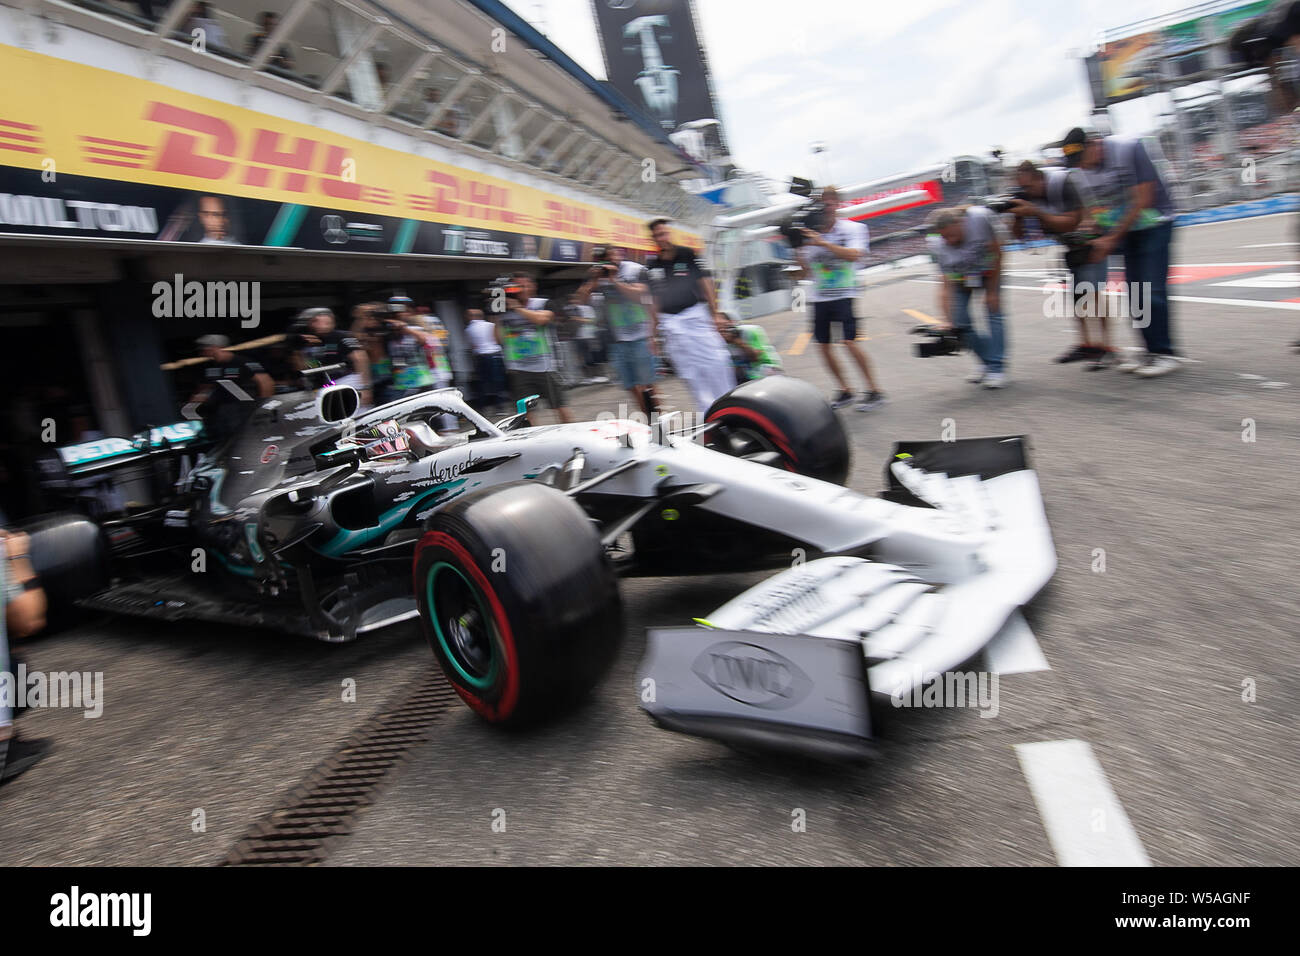 Hockenheim, Germany. 27th July, 2019. Motorsport: Formula 1 World Championship, Grand Prix of Germany. Lewis Hamilton from Great Britain of the Mercedes-AMG Petronas team drives in the pit lane during the third free practice session. Credit: Sebastian Gollnow/dpa/Alamy Live News Stock Photo